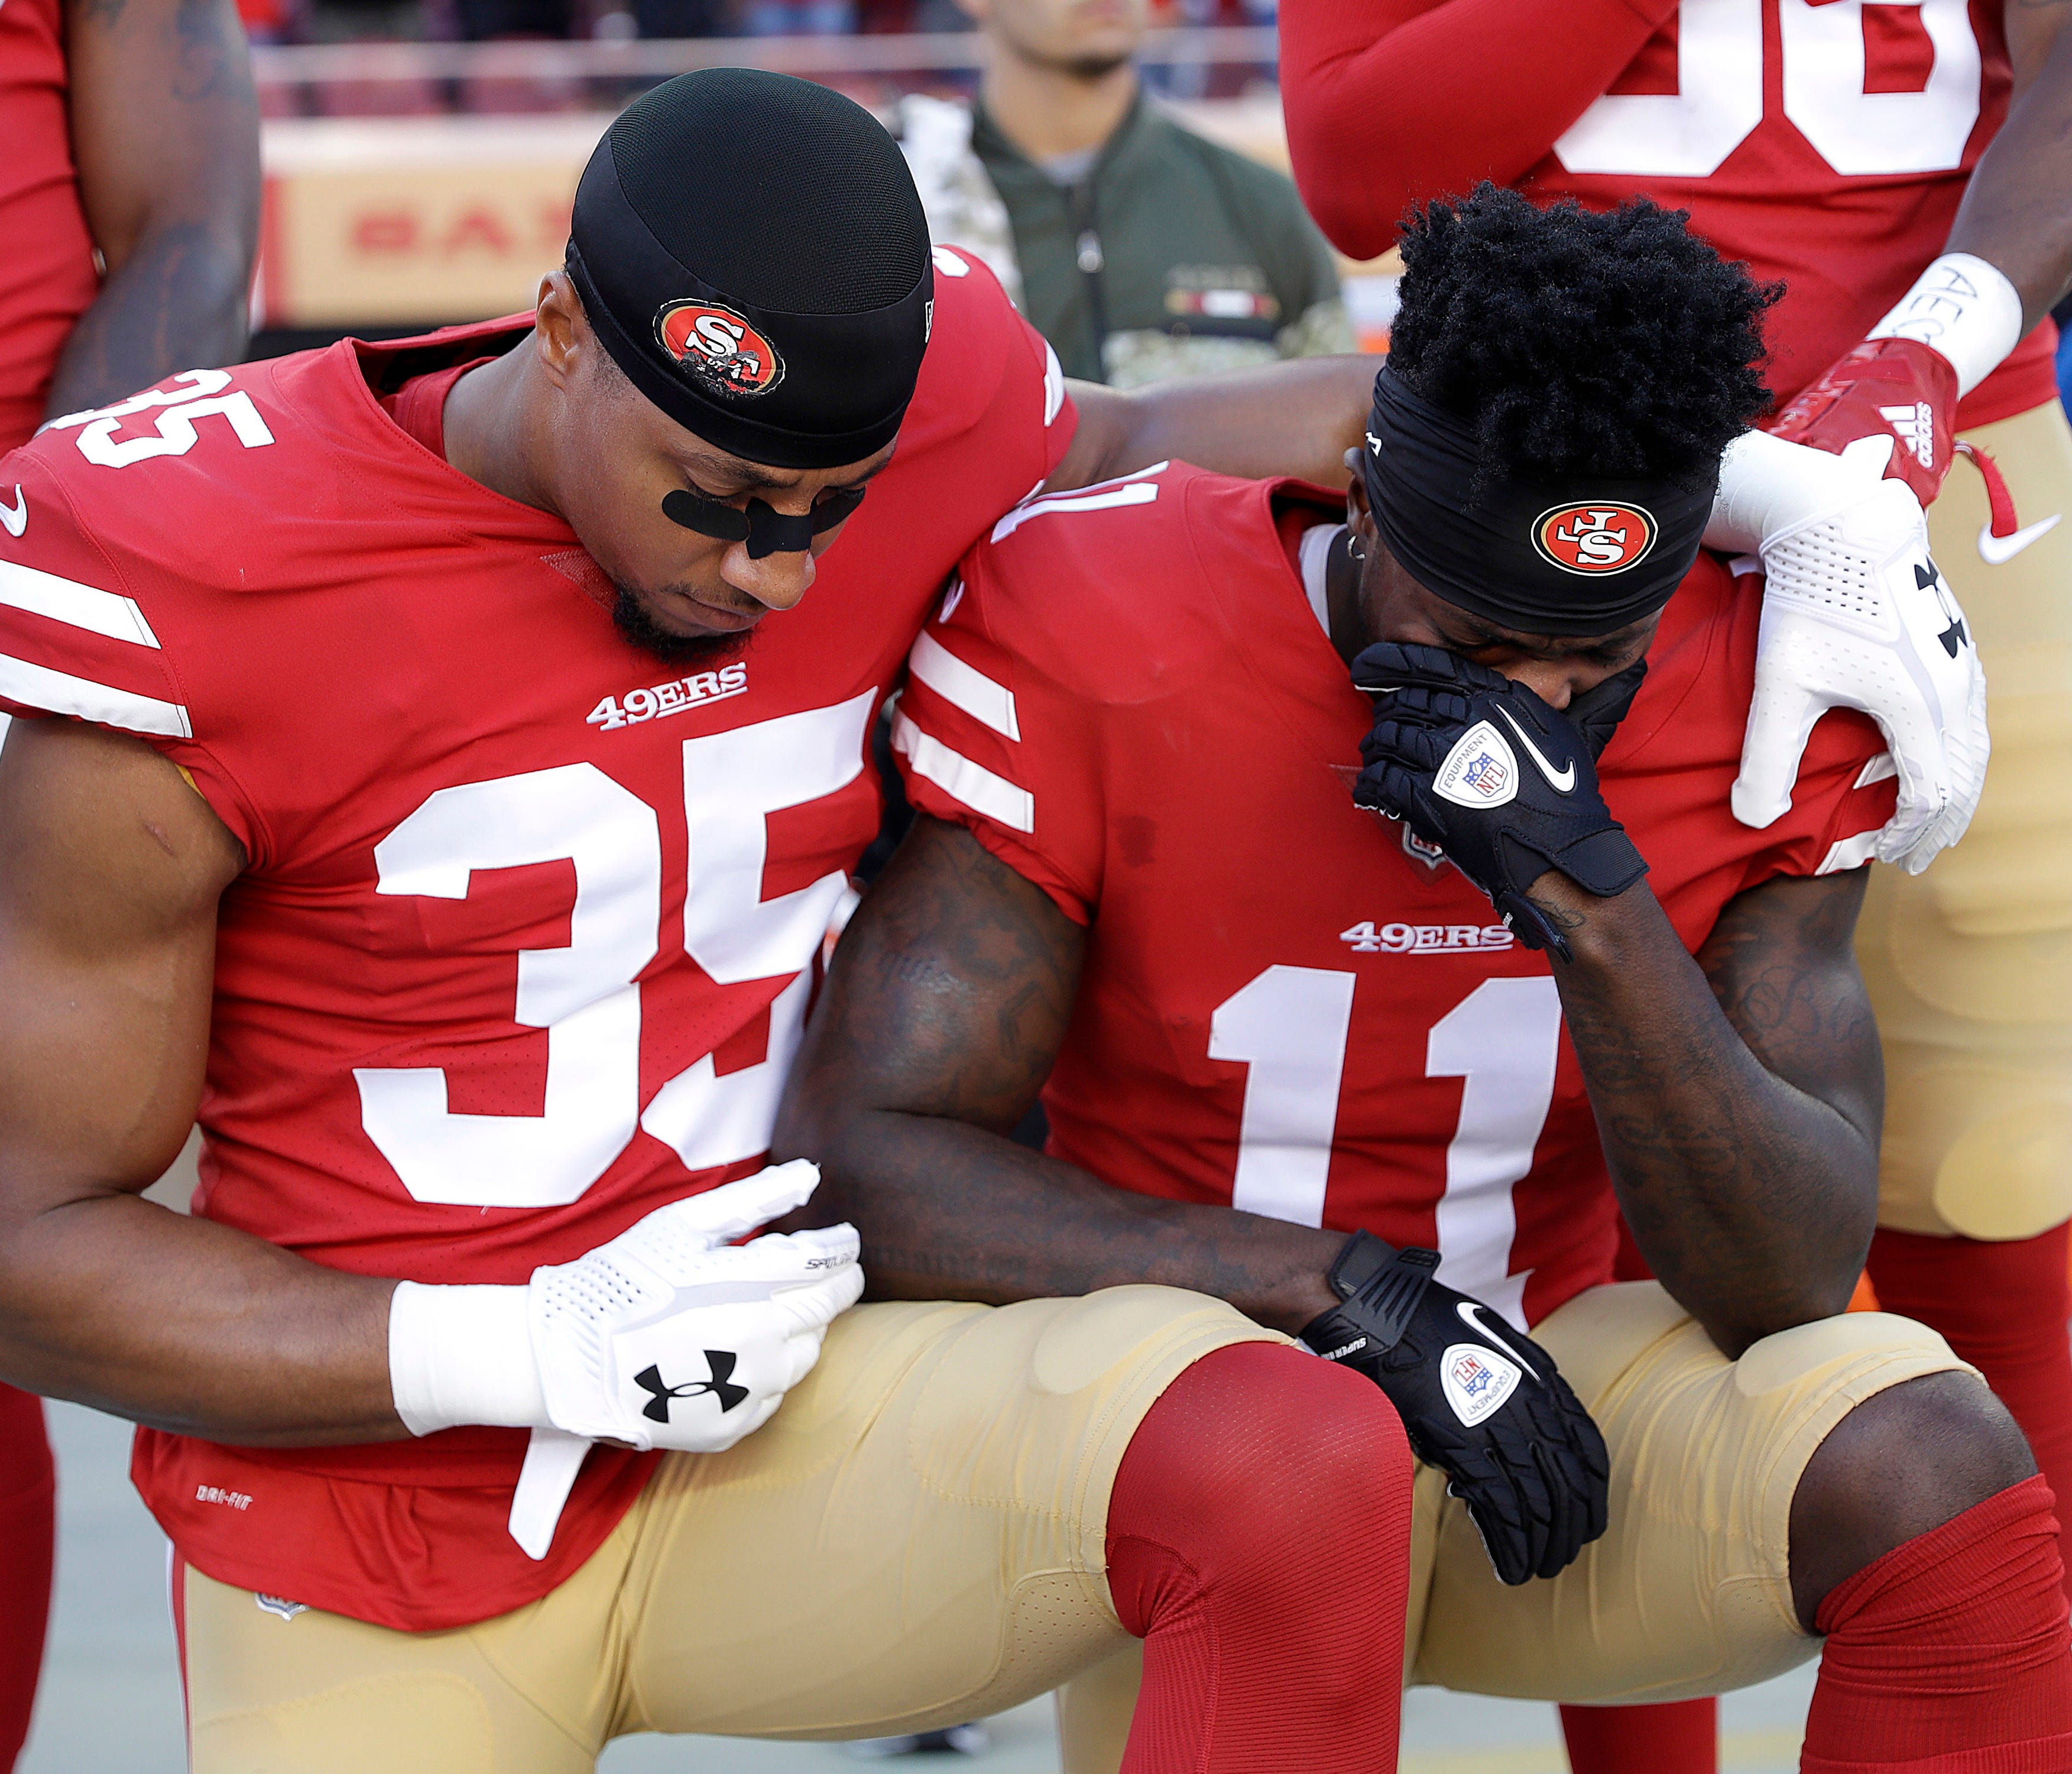 San Francisco 49ers safety Eric Reid (35) and wide receiver Marquise Goodwin (11) kneel during the performance of the national anthem before an NFL football game against the New York Giants in Santa Clara, Calif., Sunday, Nov. 12, 2017. (AP Photo/Mar